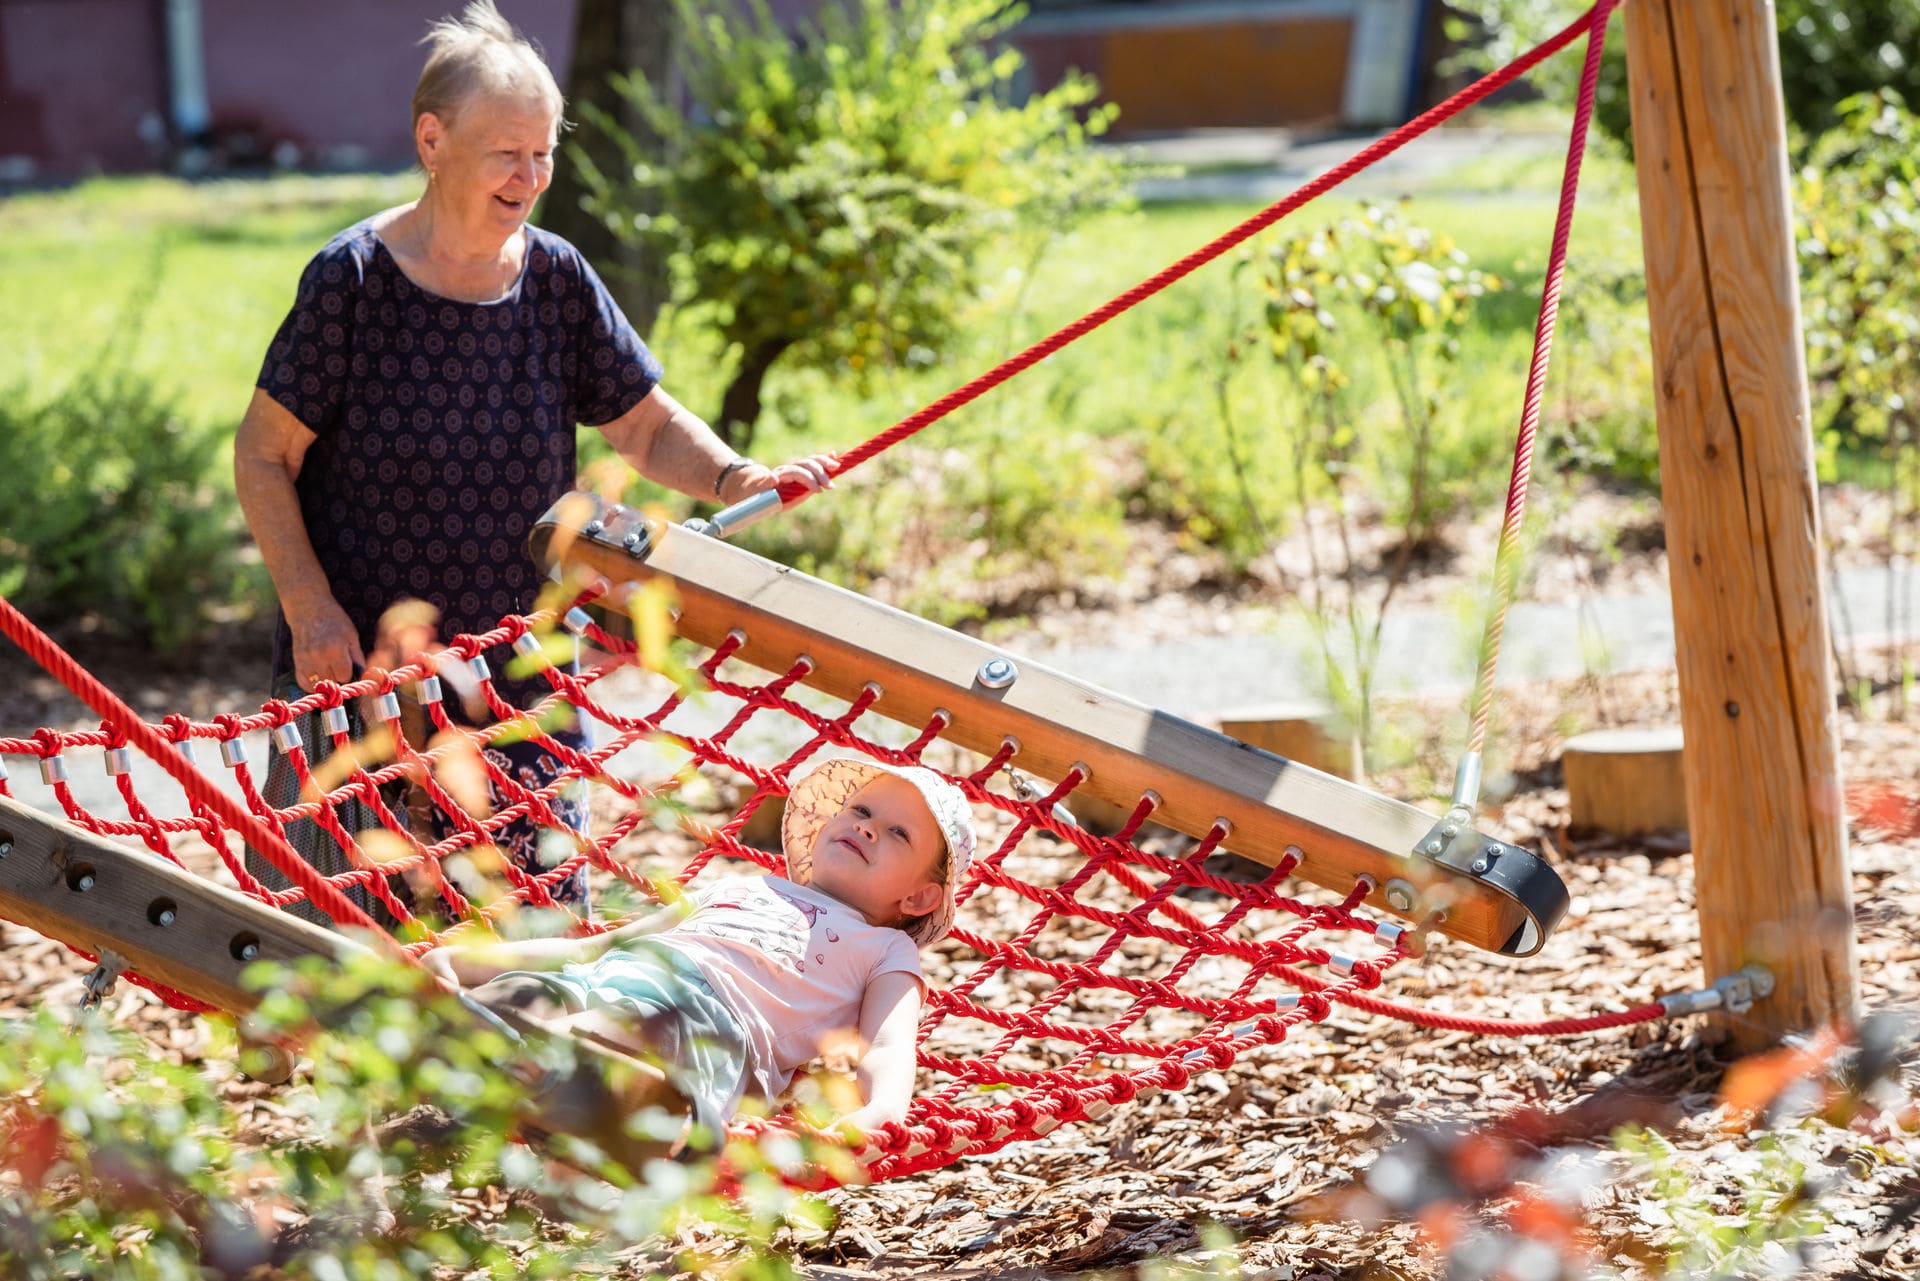 Playful or relaxing the hammock is fun for people of all ages to enjoy play